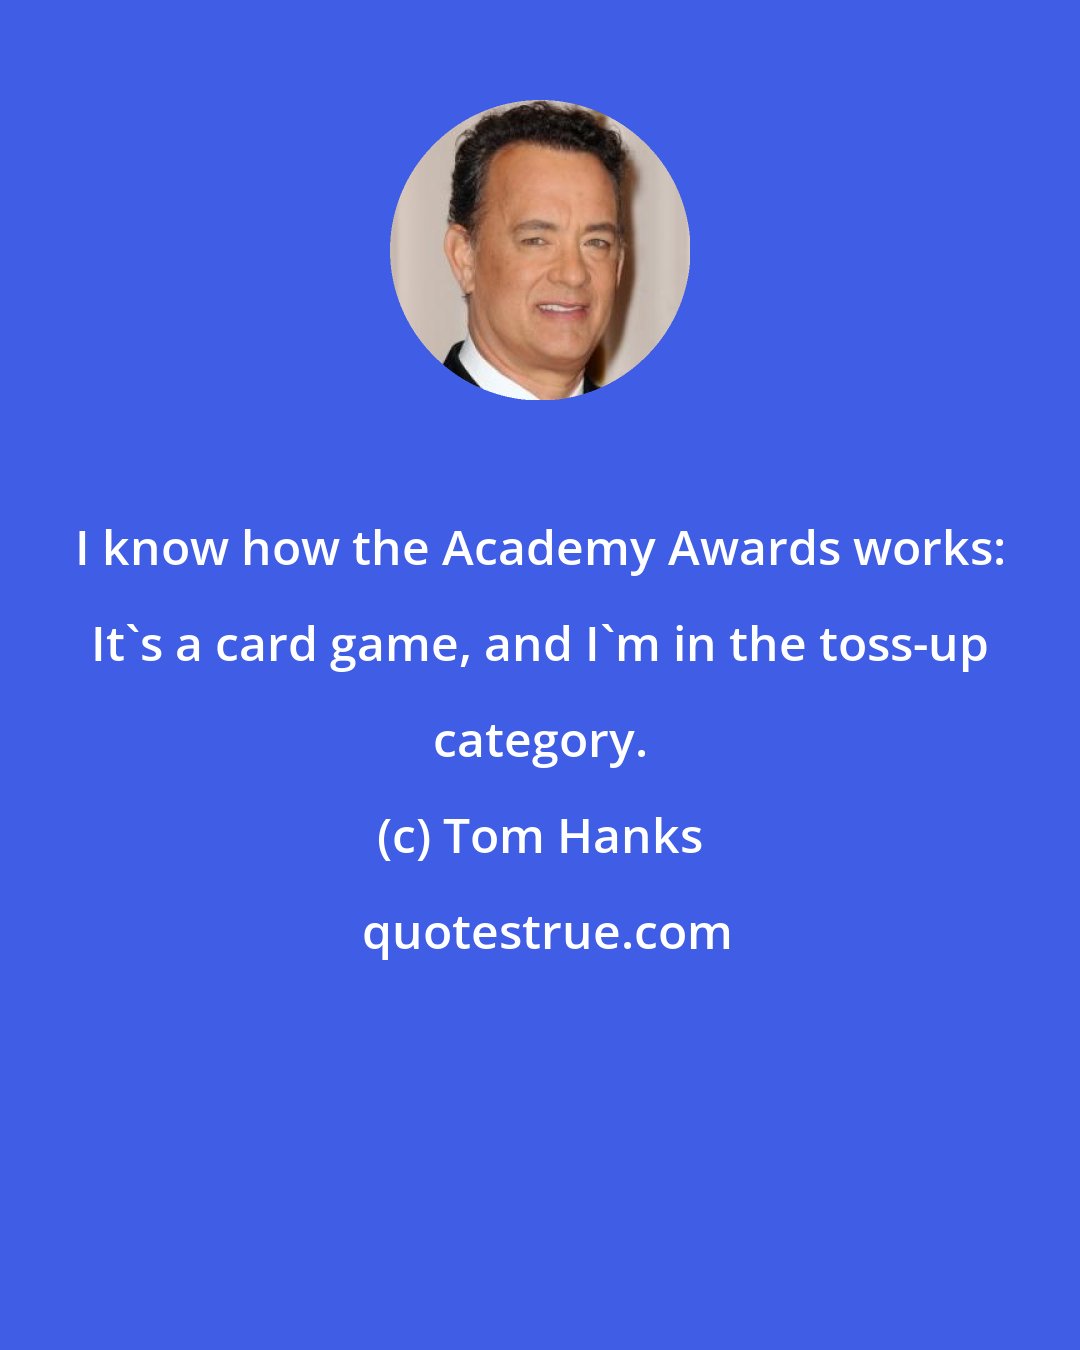 Tom Hanks: I know how the Academy Awards works: It's a card game, and I'm in the toss-up category.